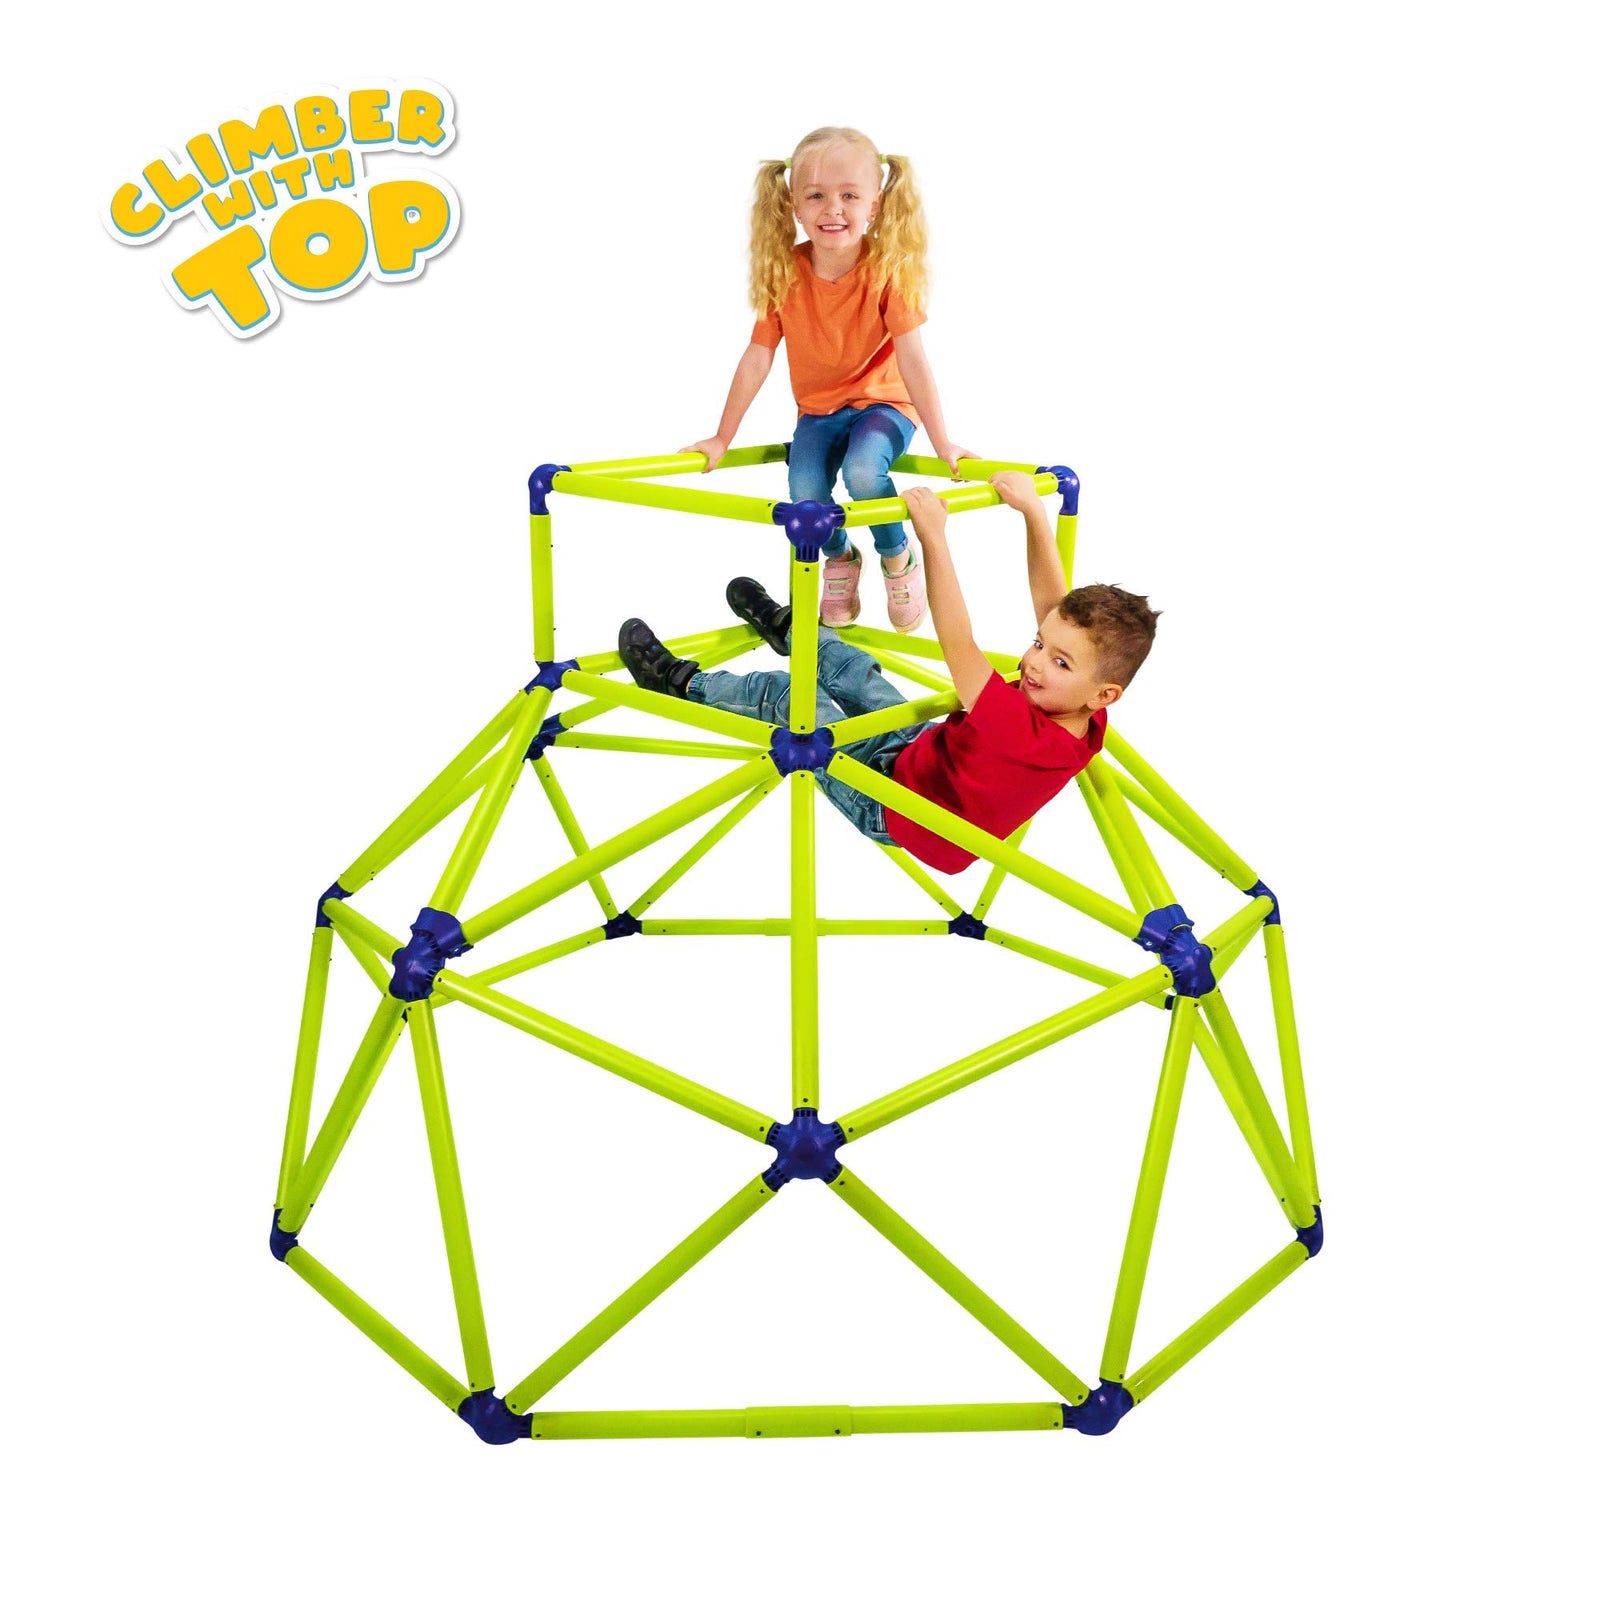 Eezy Peezy Monkey Bars Climbing Tower - Active Outdoor Fun for Kids Ages 3 to 8 Years Old, Green/Blue